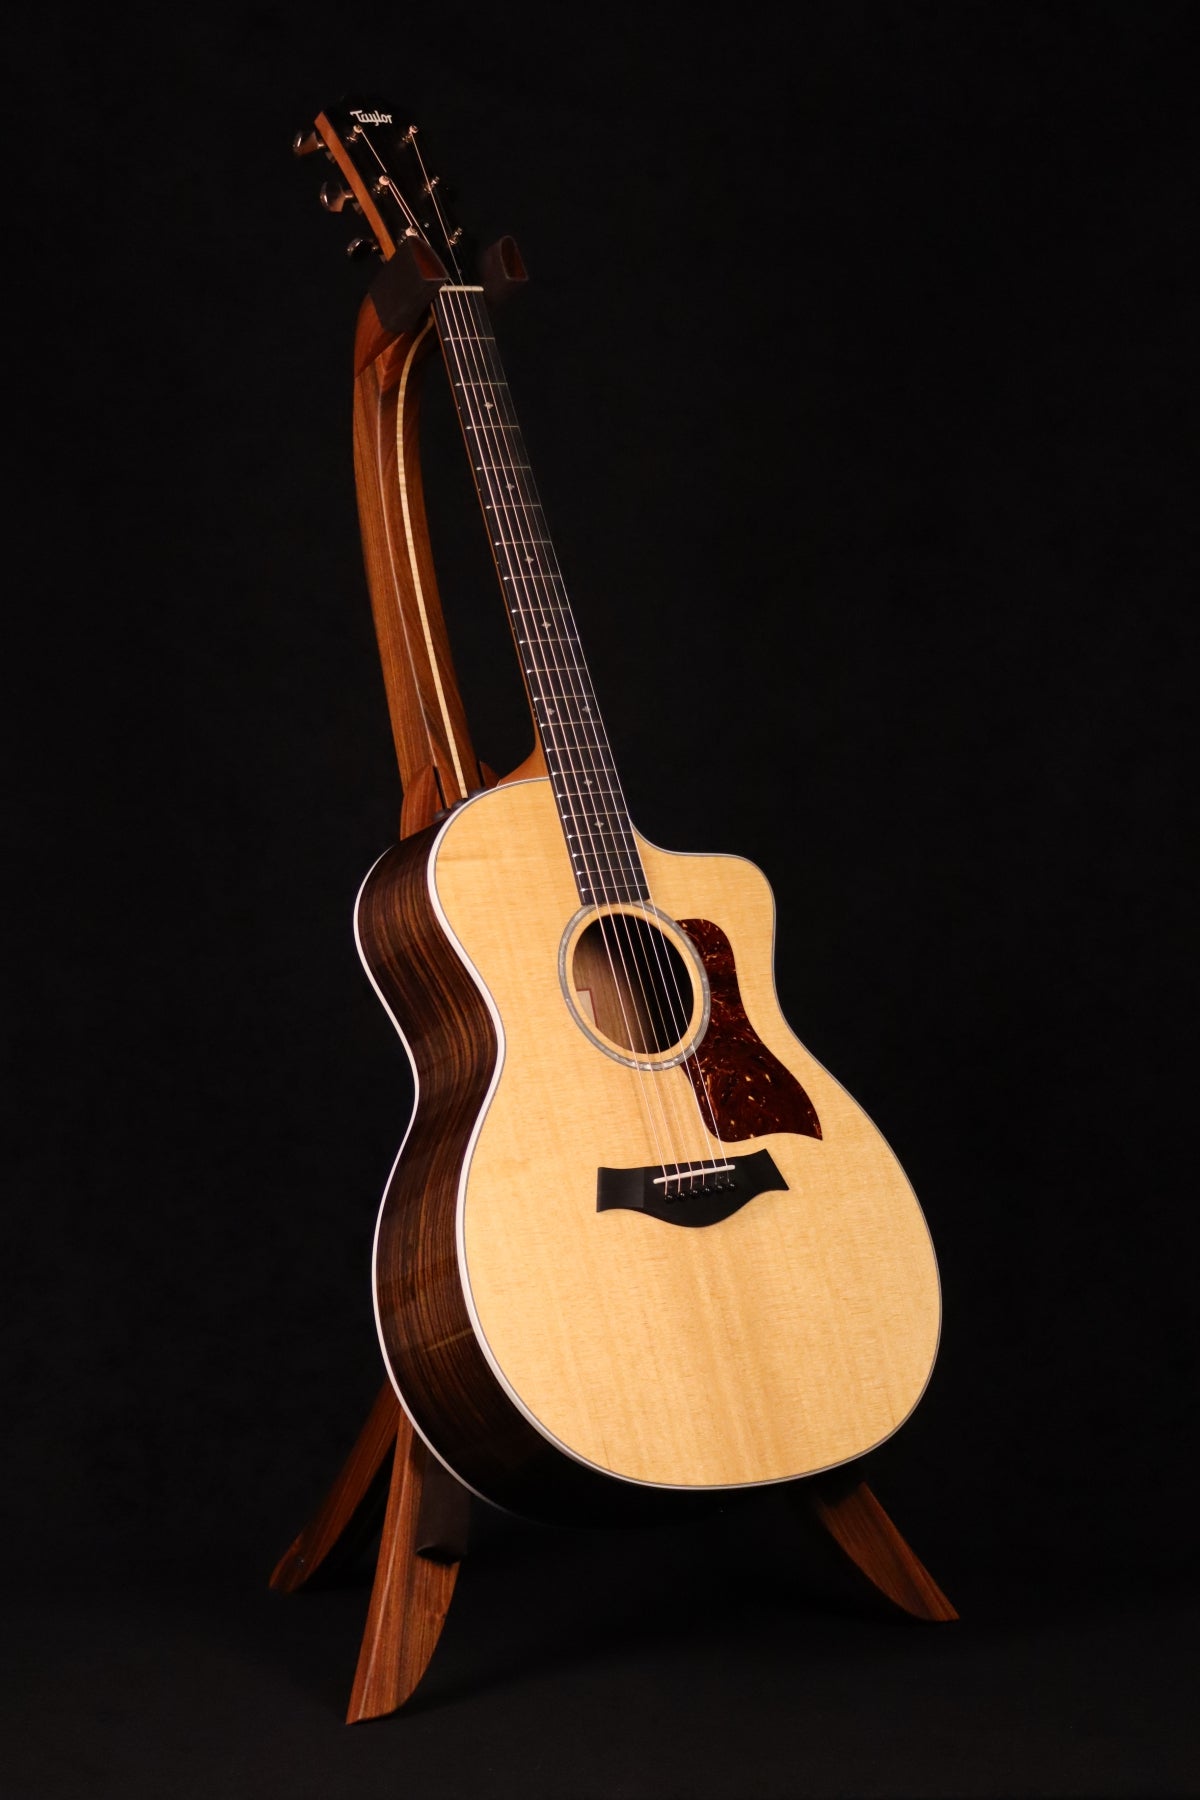 Folding morado Bolivian rosewood pau fero and curly maple wood guitar floor stand full front image with Taylor guitar